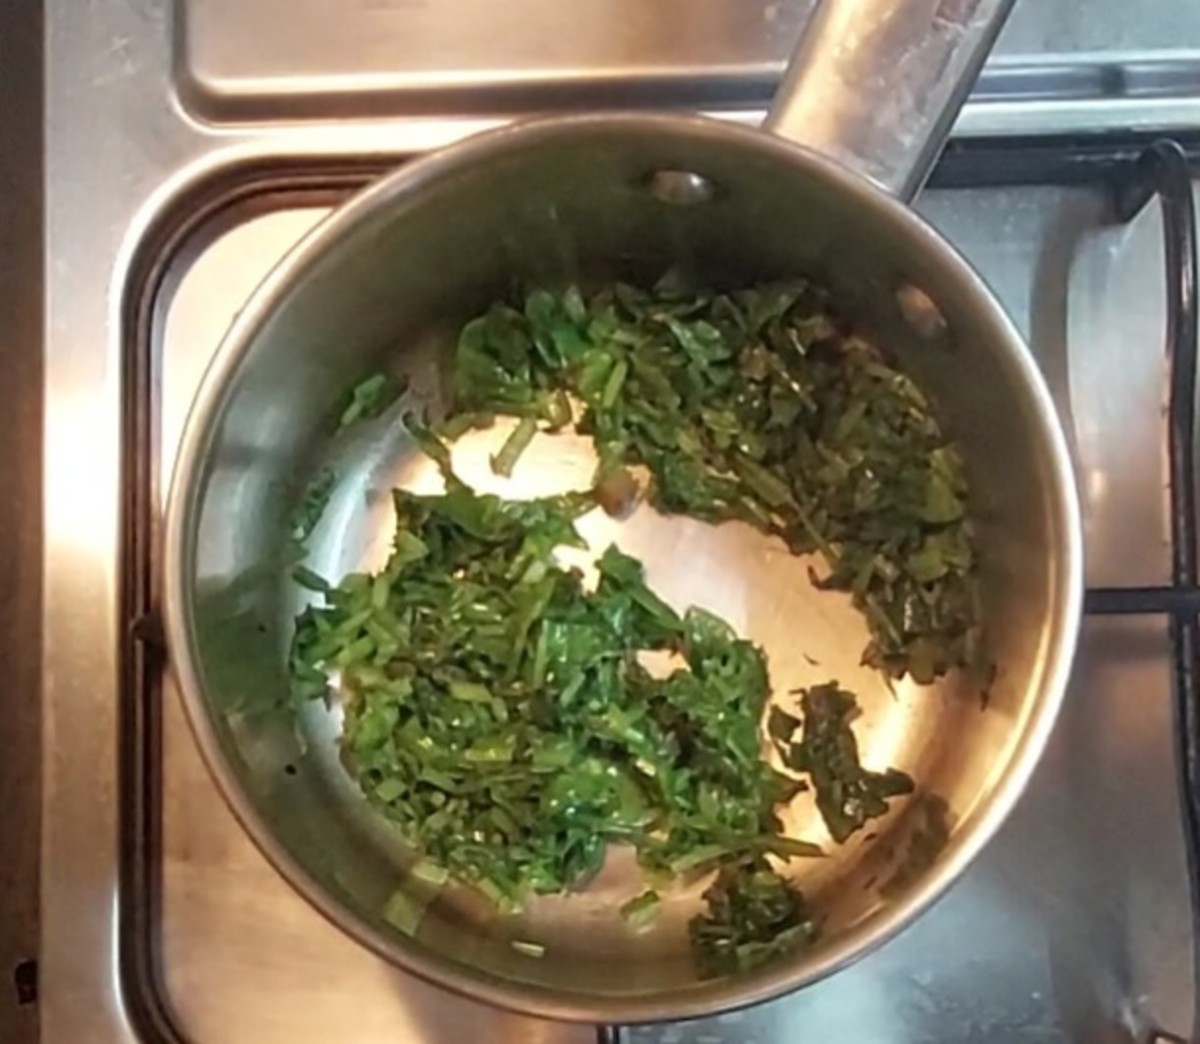 Fry till the spinach leaves shrink.